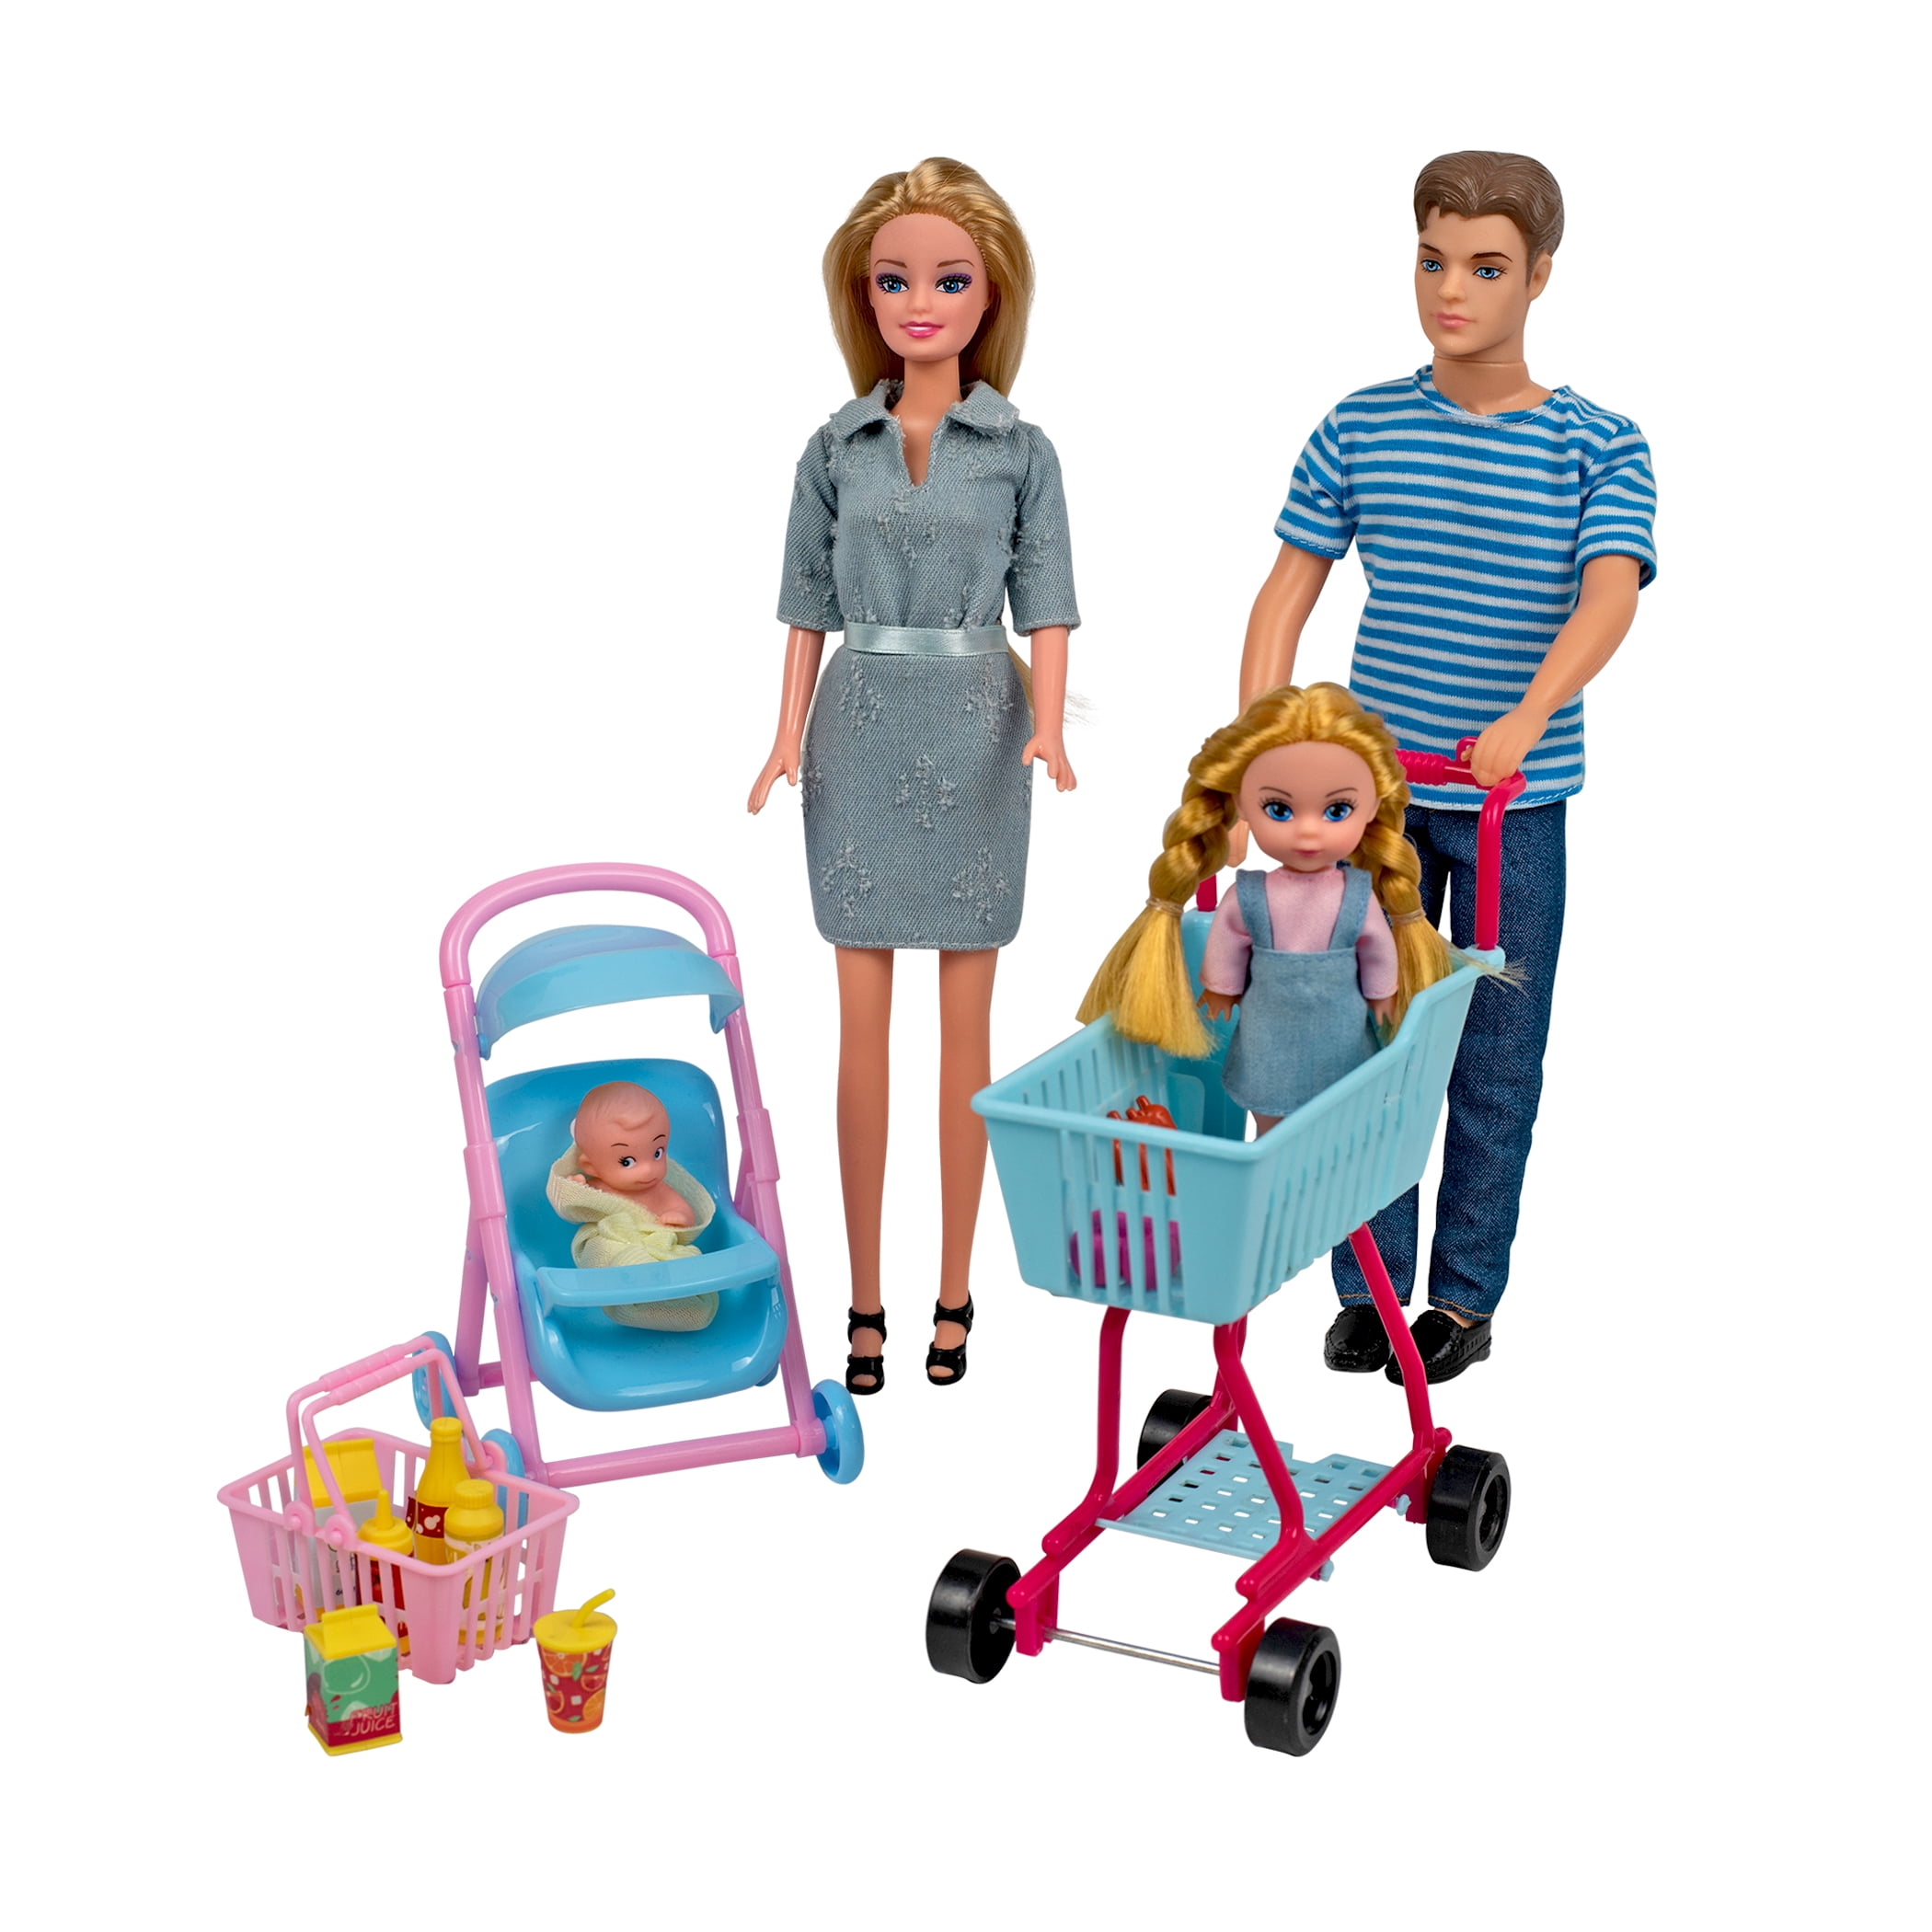 Chic Family Doll Set with Accessories - Ages 3 Years and up